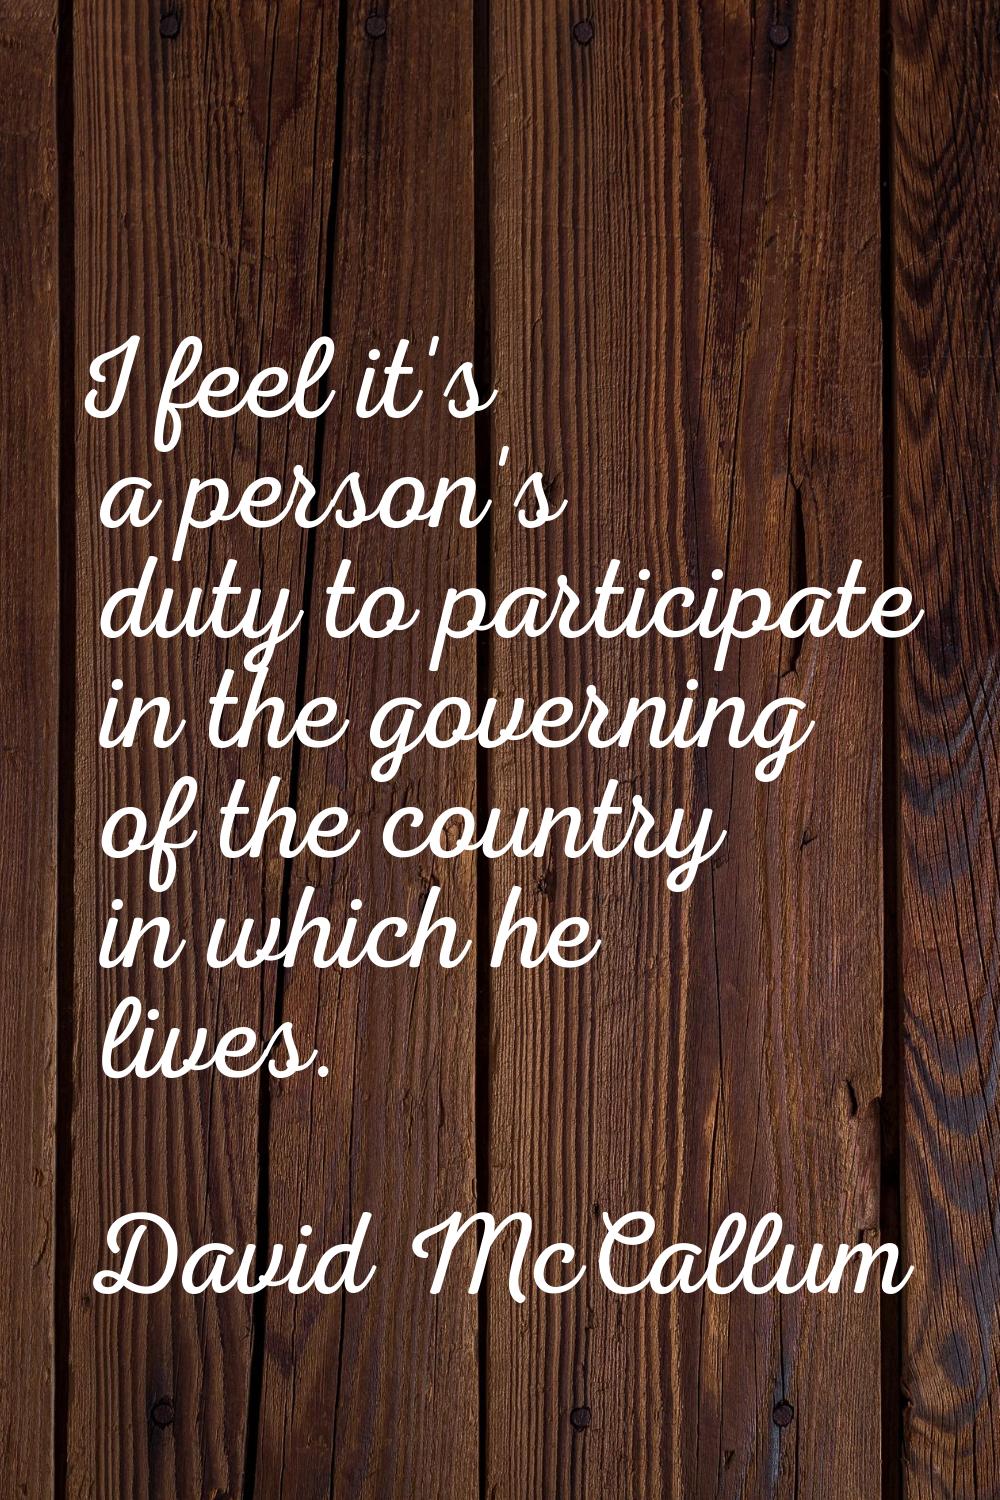 I feel it's a person's duty to participate in the governing of the country in which he lives.